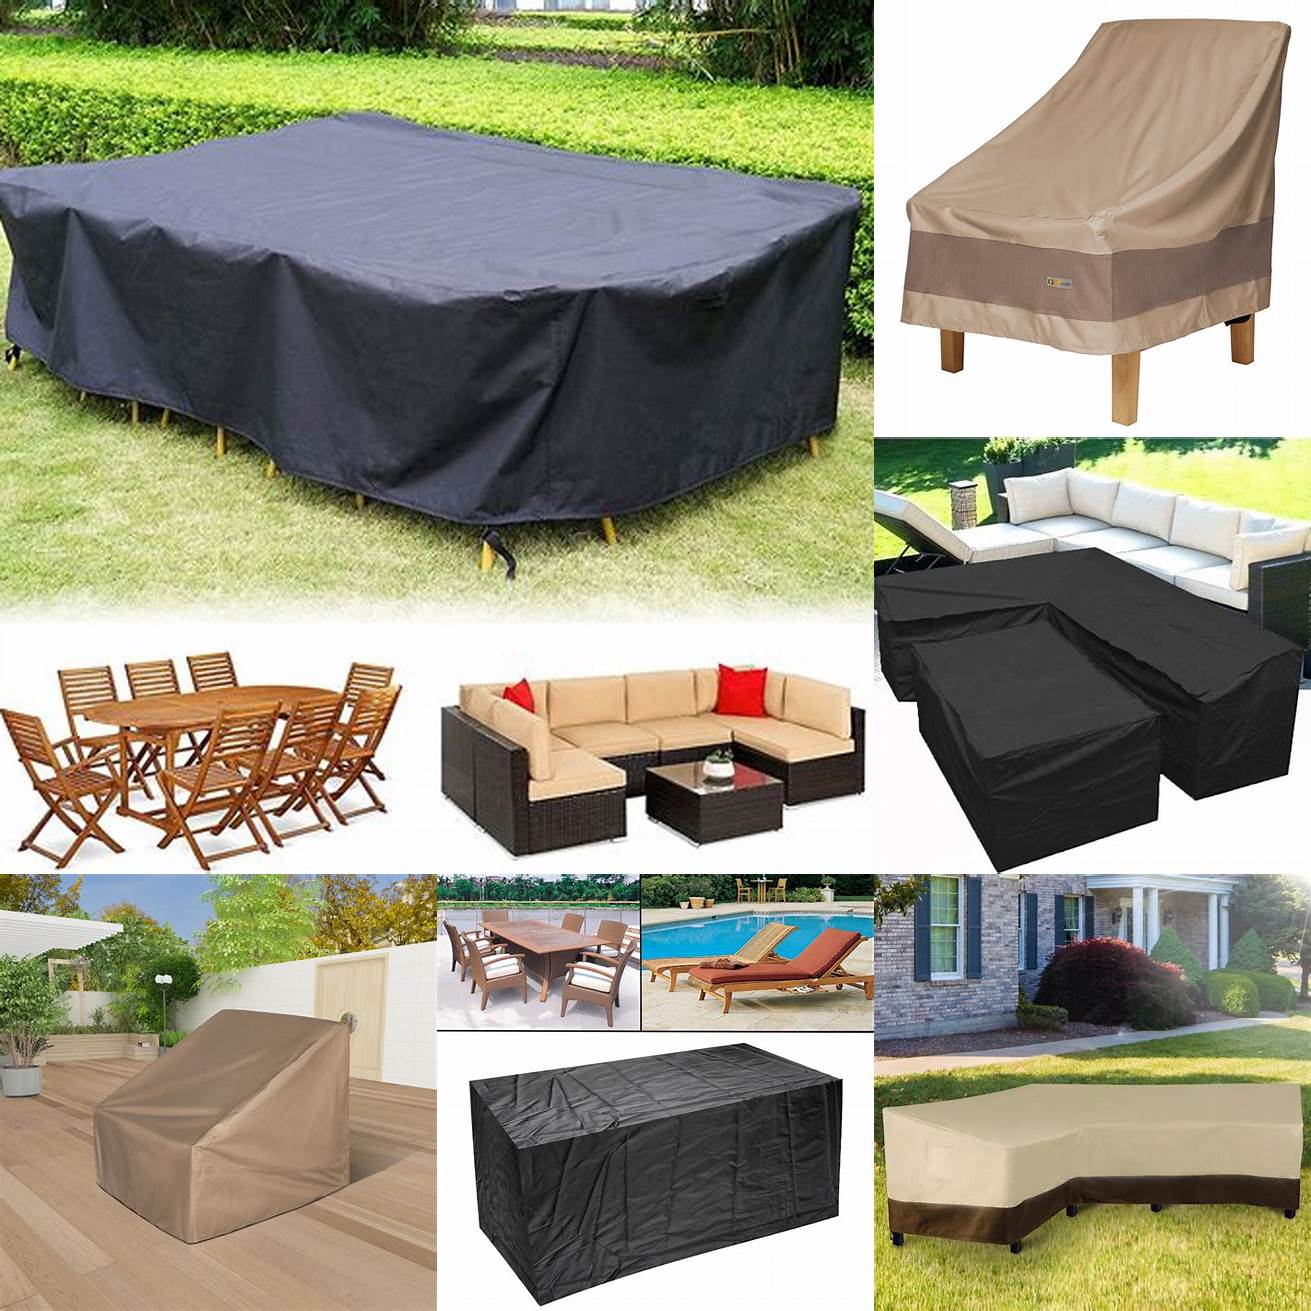 Examples of outdoor furniture covers